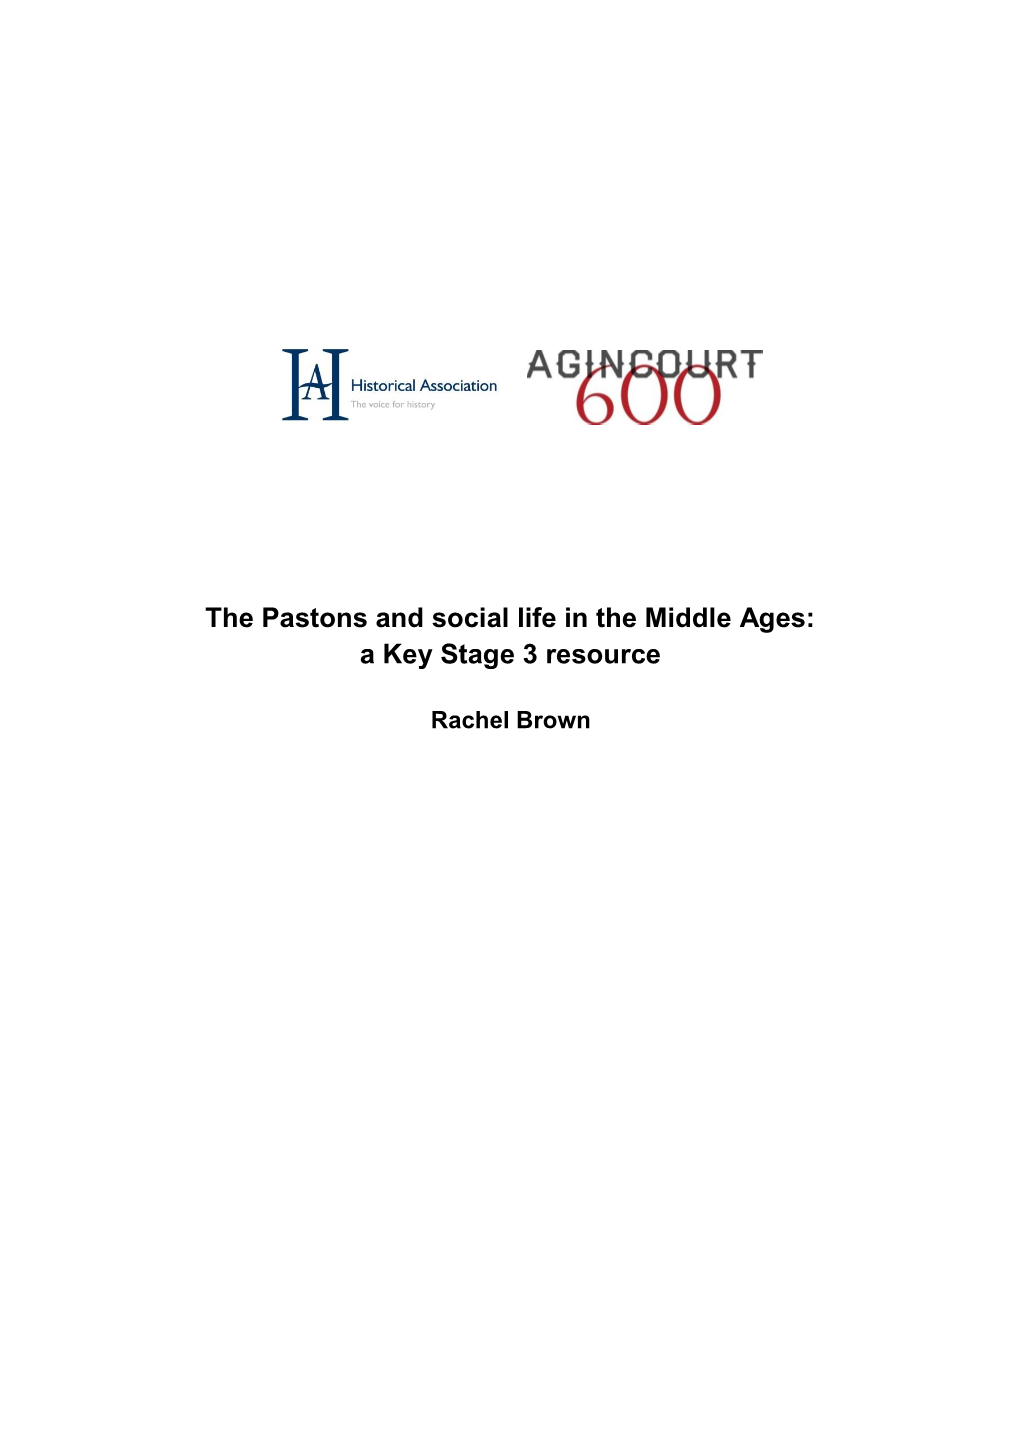 The Pastons and Social Life in the Middle Ages: a Key Stage 3 Resource